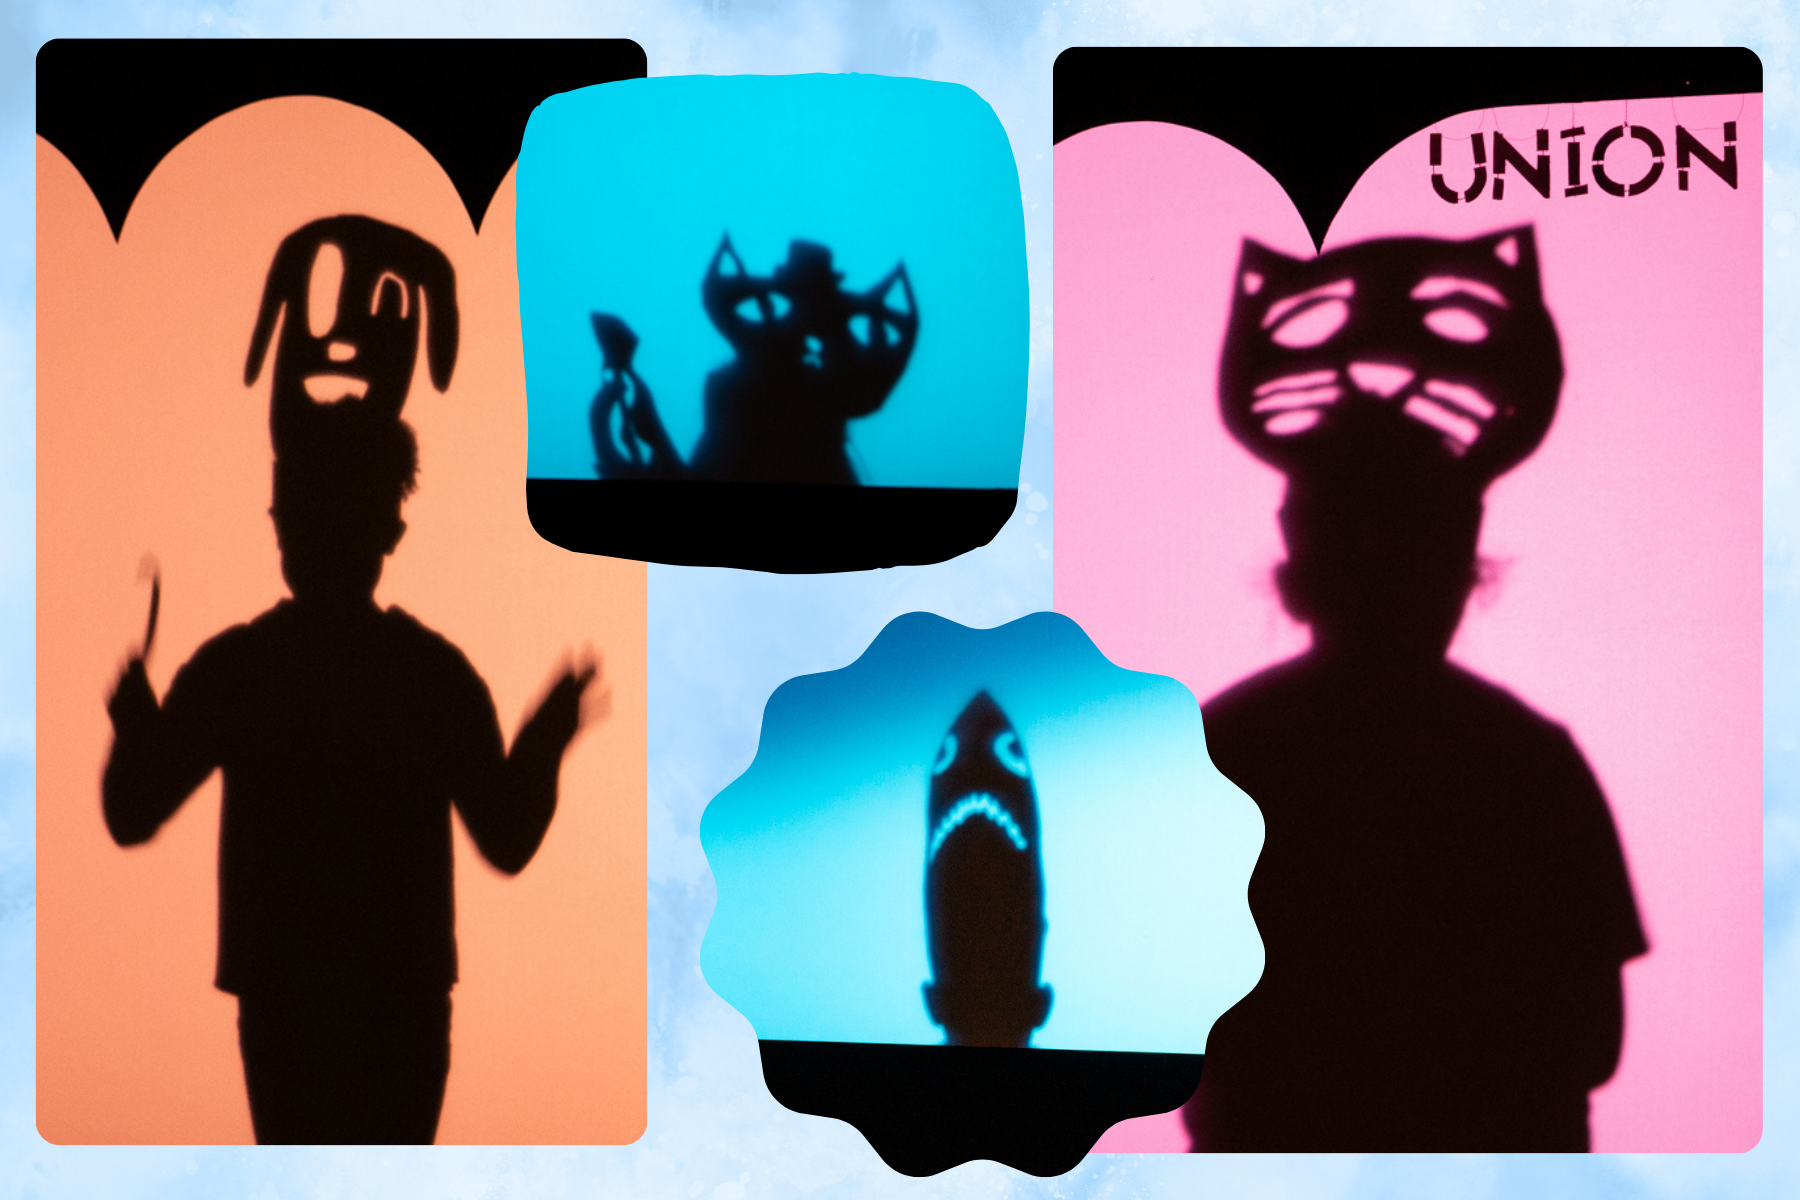 A collage of different silhouettes of youth with animal masks and cardboard cutouts casting shadows on a screen